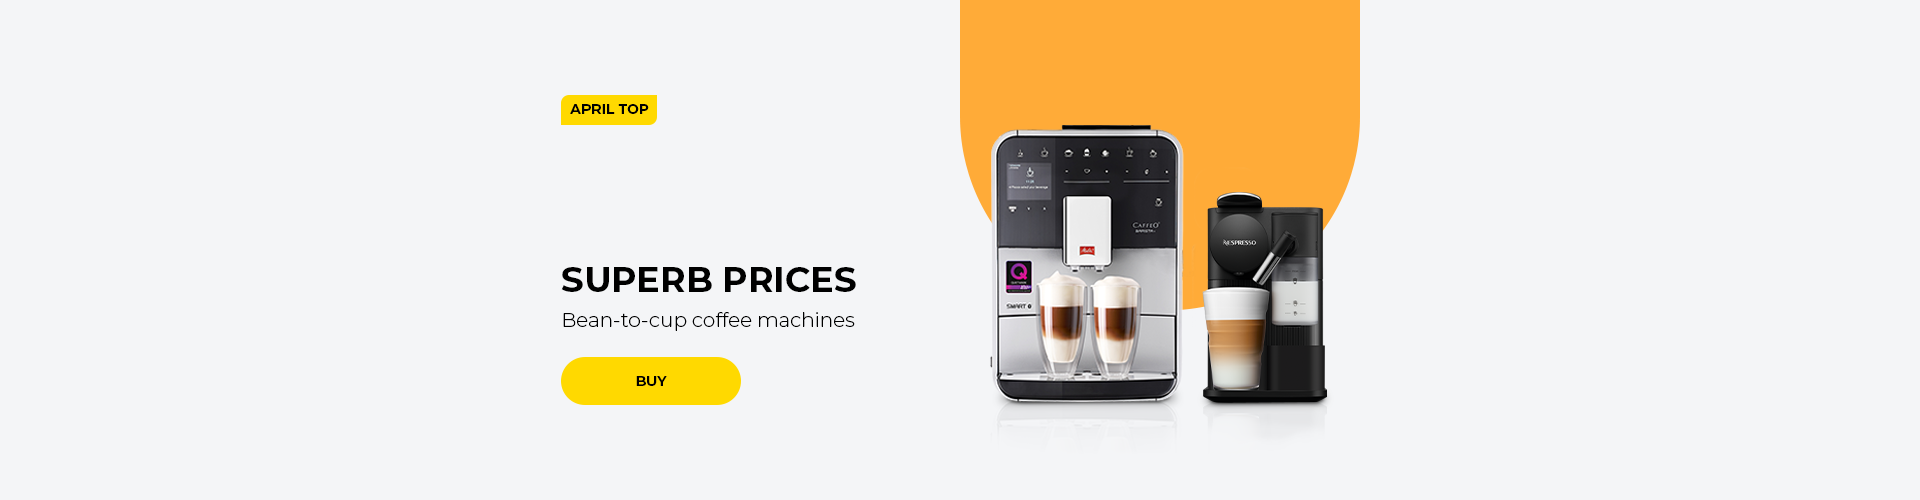 SUPERB PRICES Bean-to-cup coffee machines